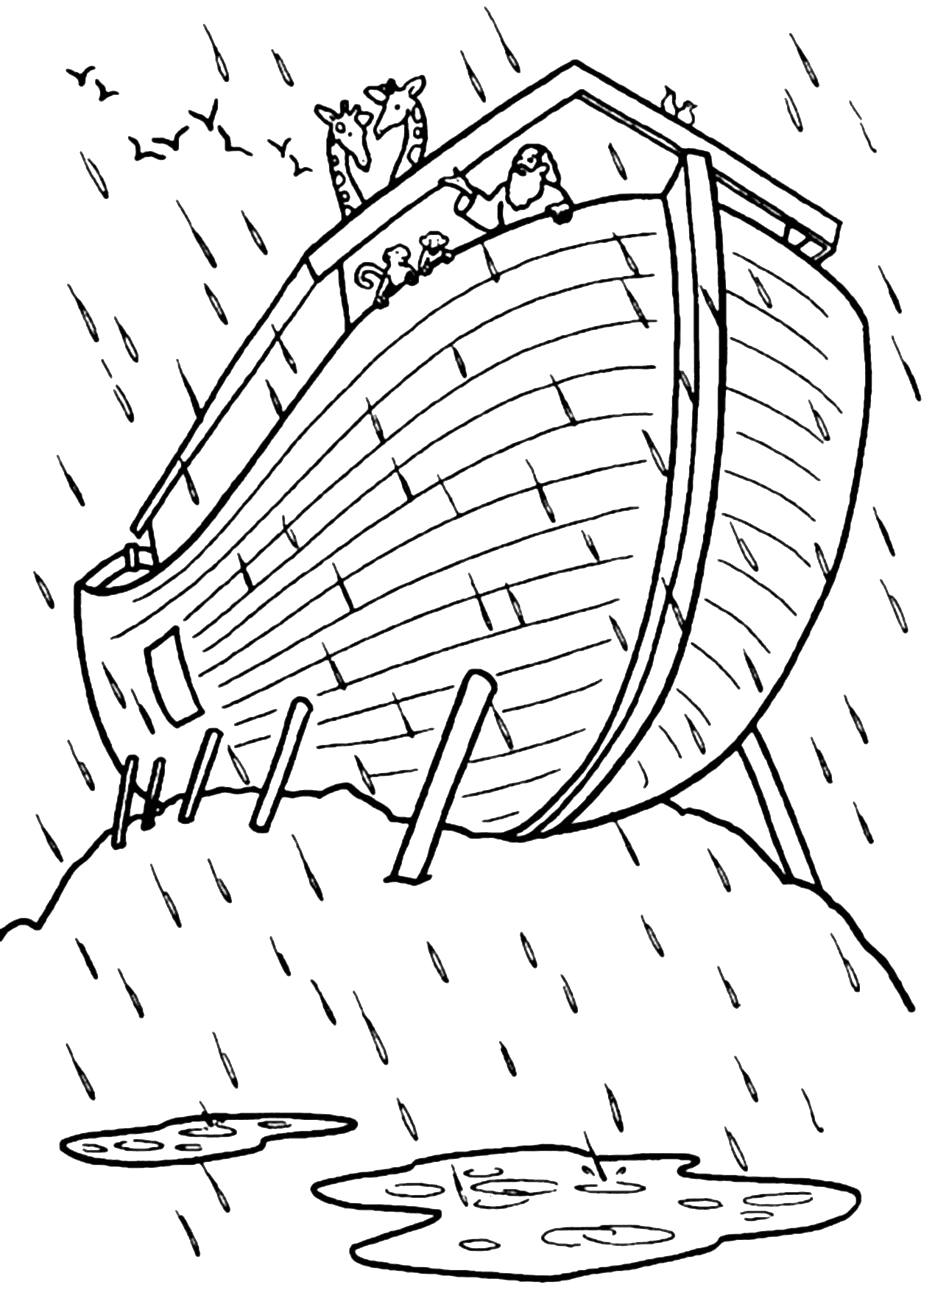 Noahs Ark Was Large Coloring Page